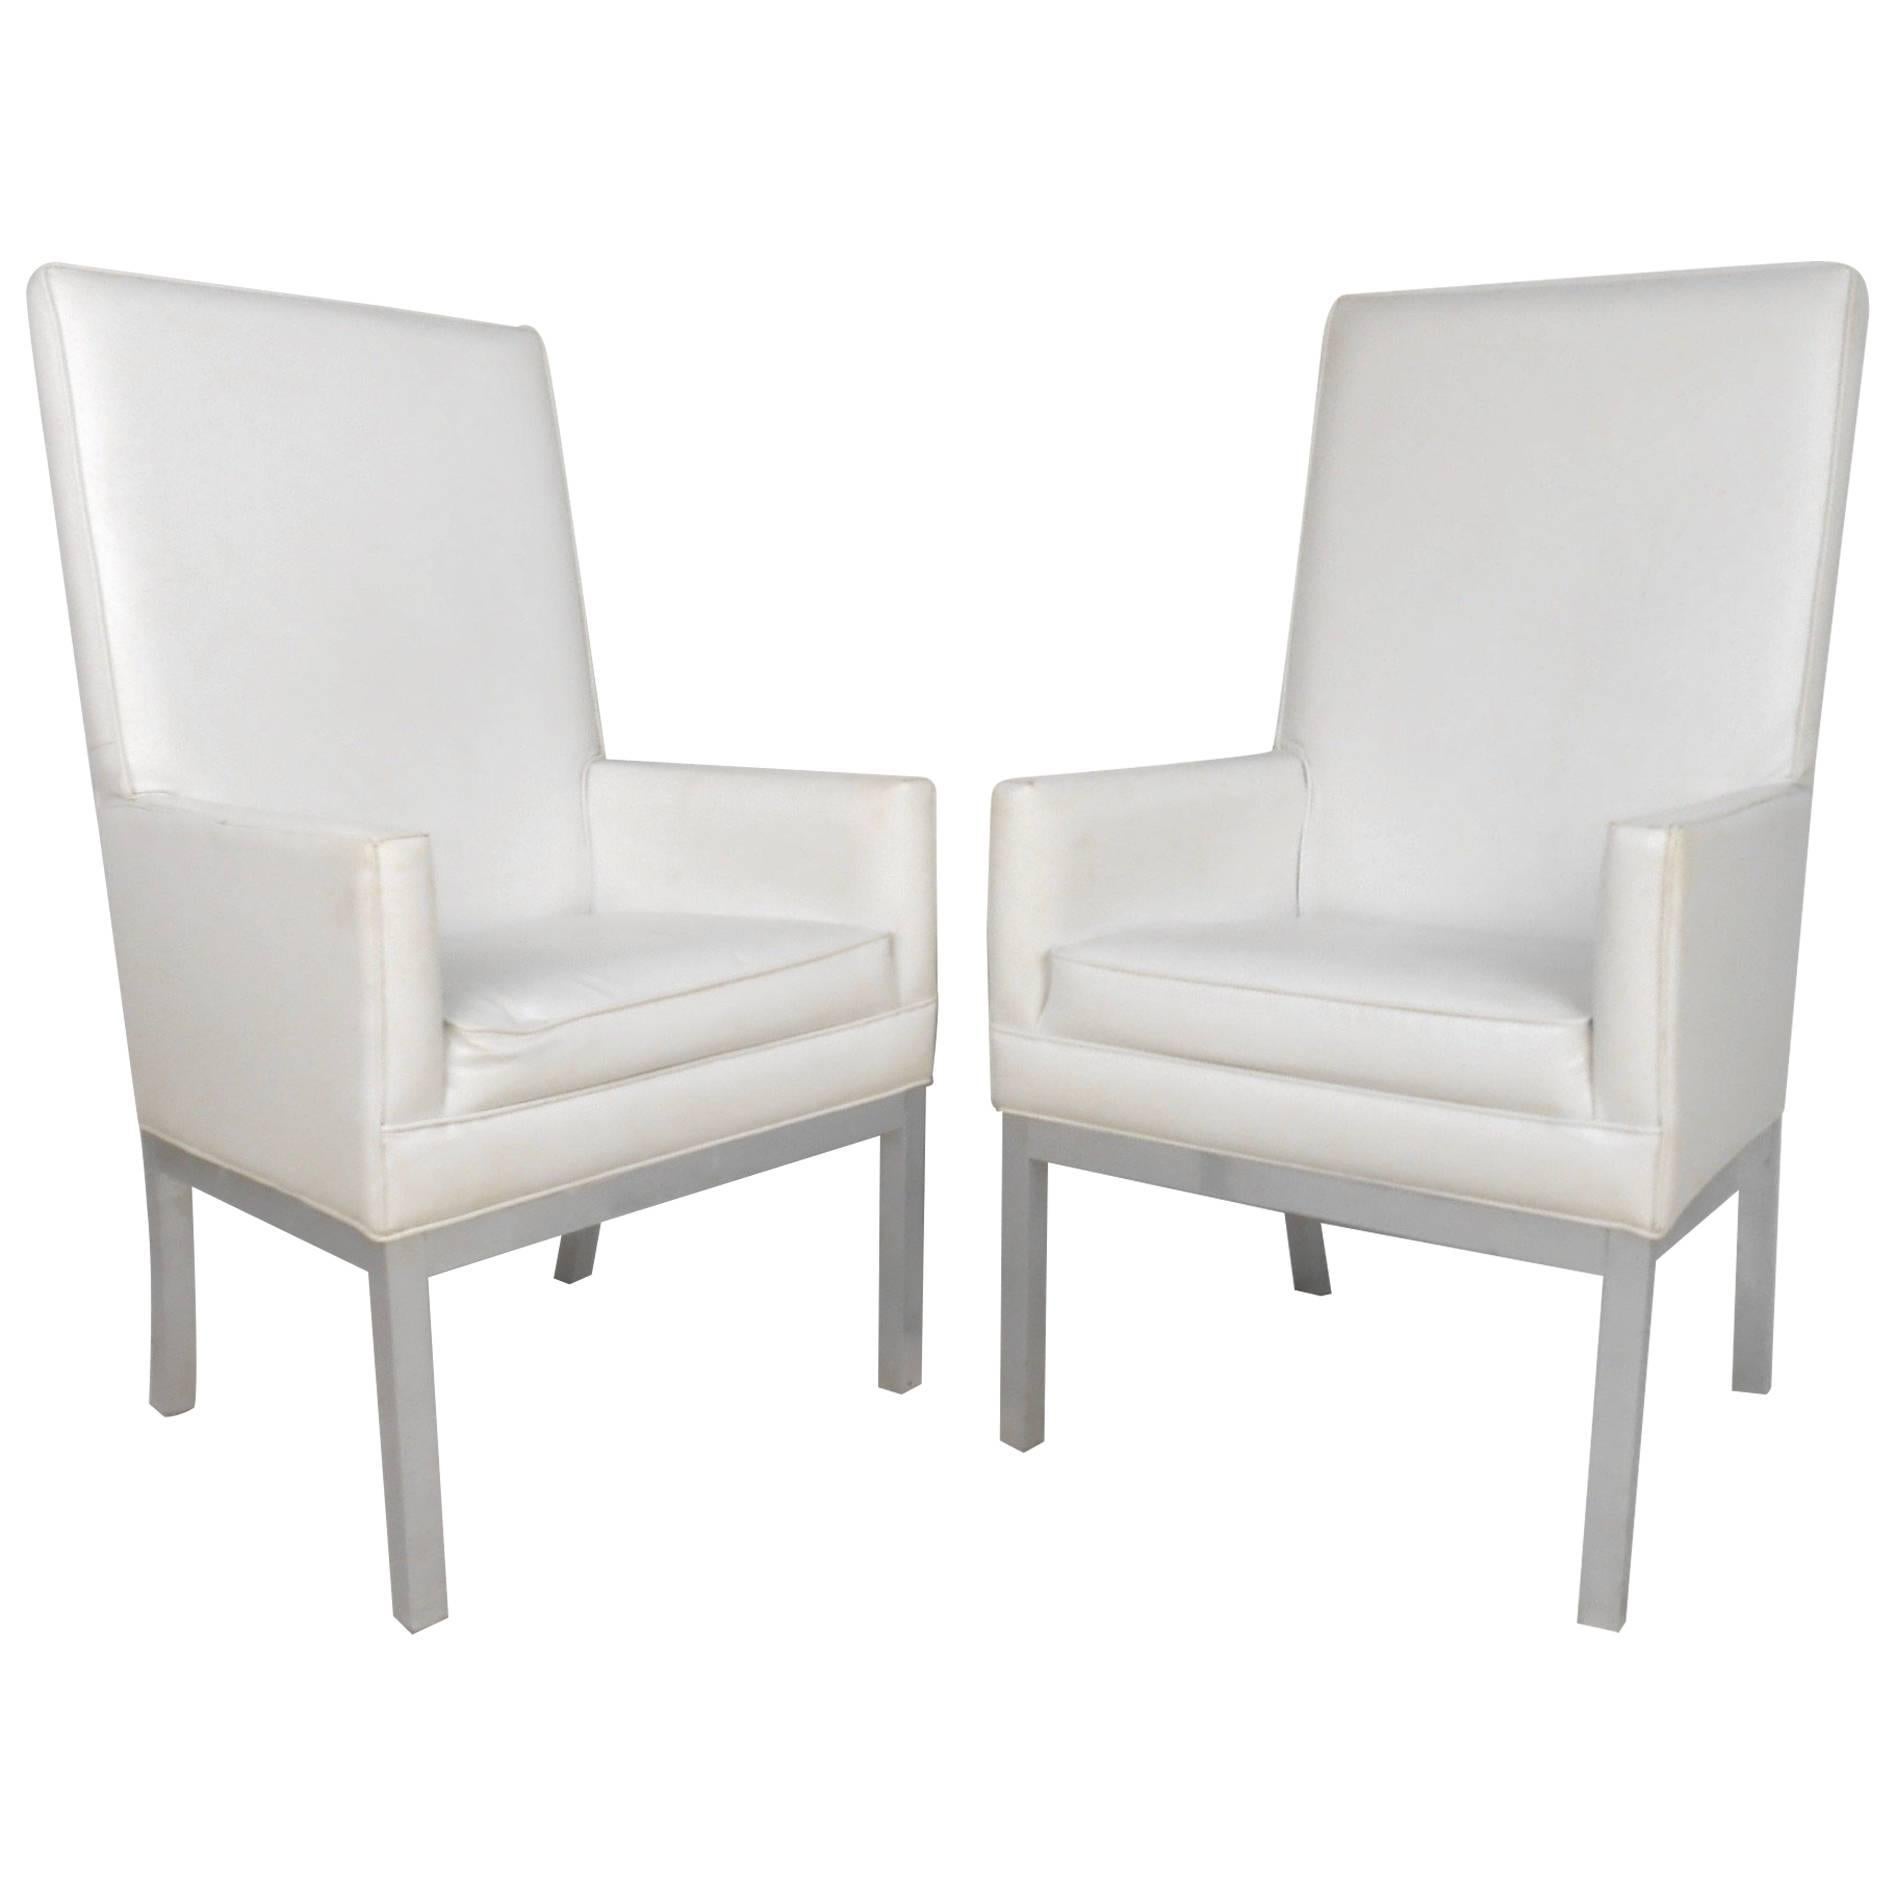 Pair of Vintage Modern High Back Vinyl Armchairs For Sale